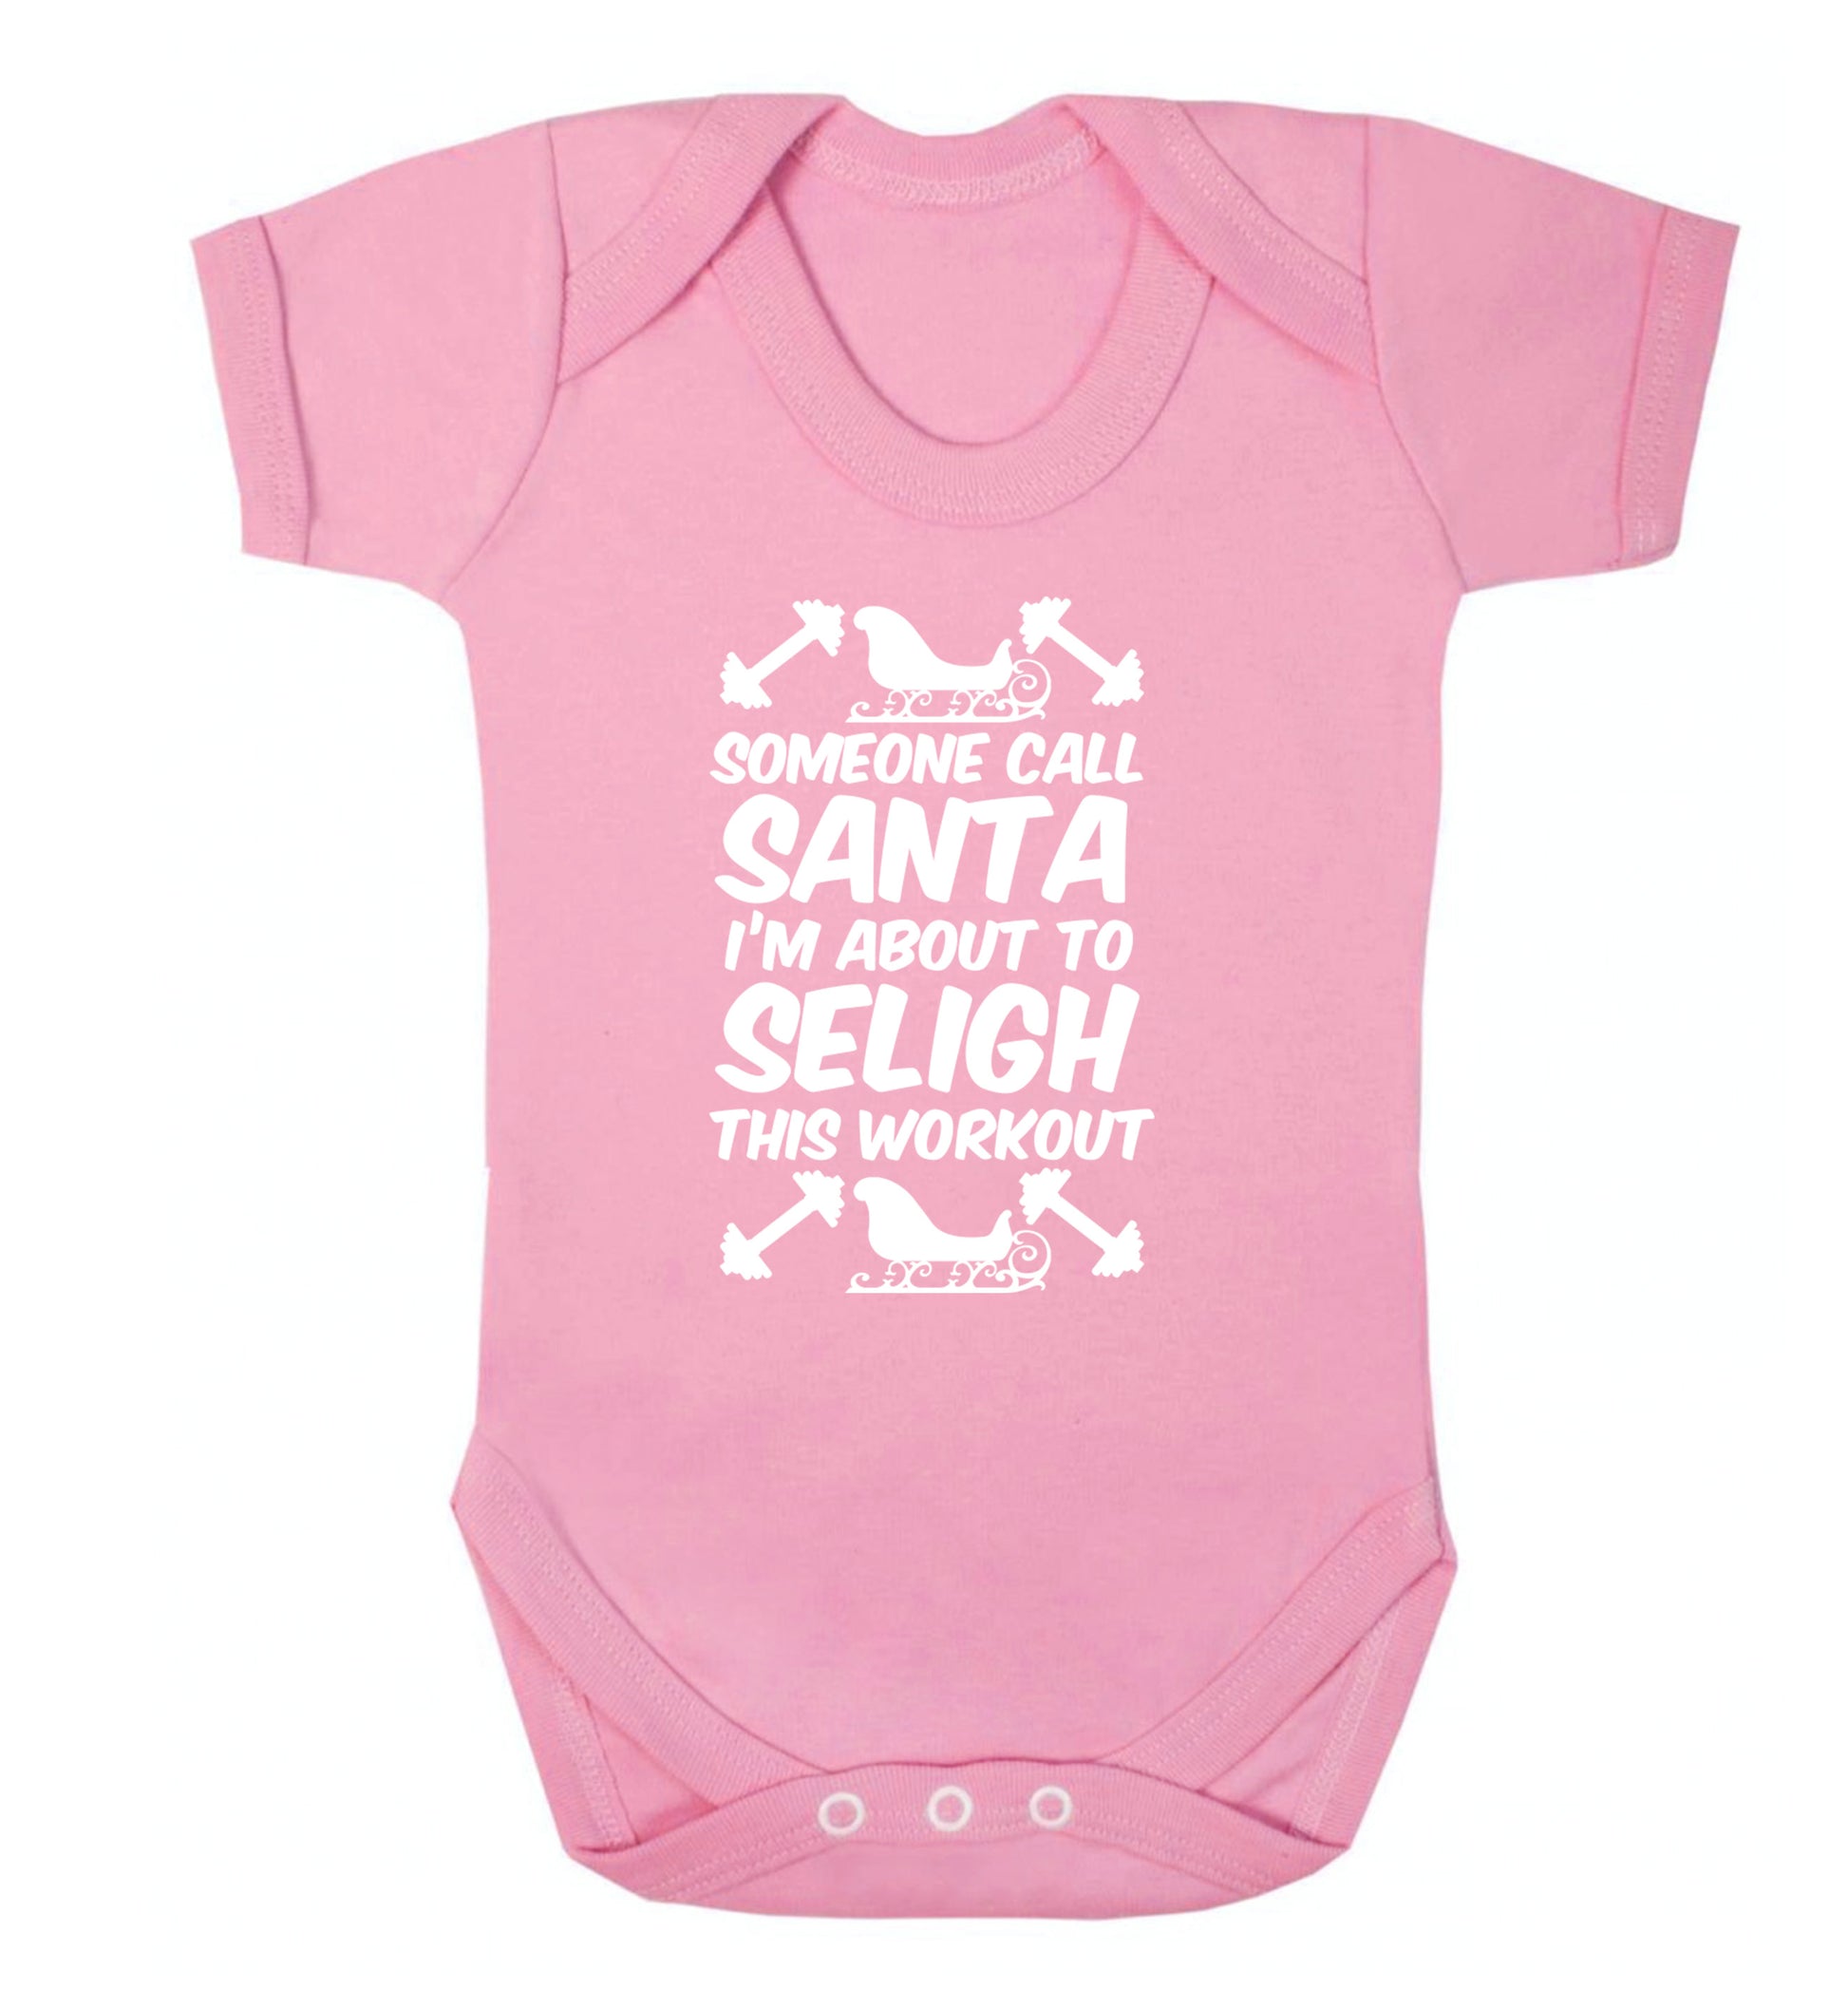 Someone call santa, I'm about to sleigh this workout Baby Vest pale pink 18-24 months